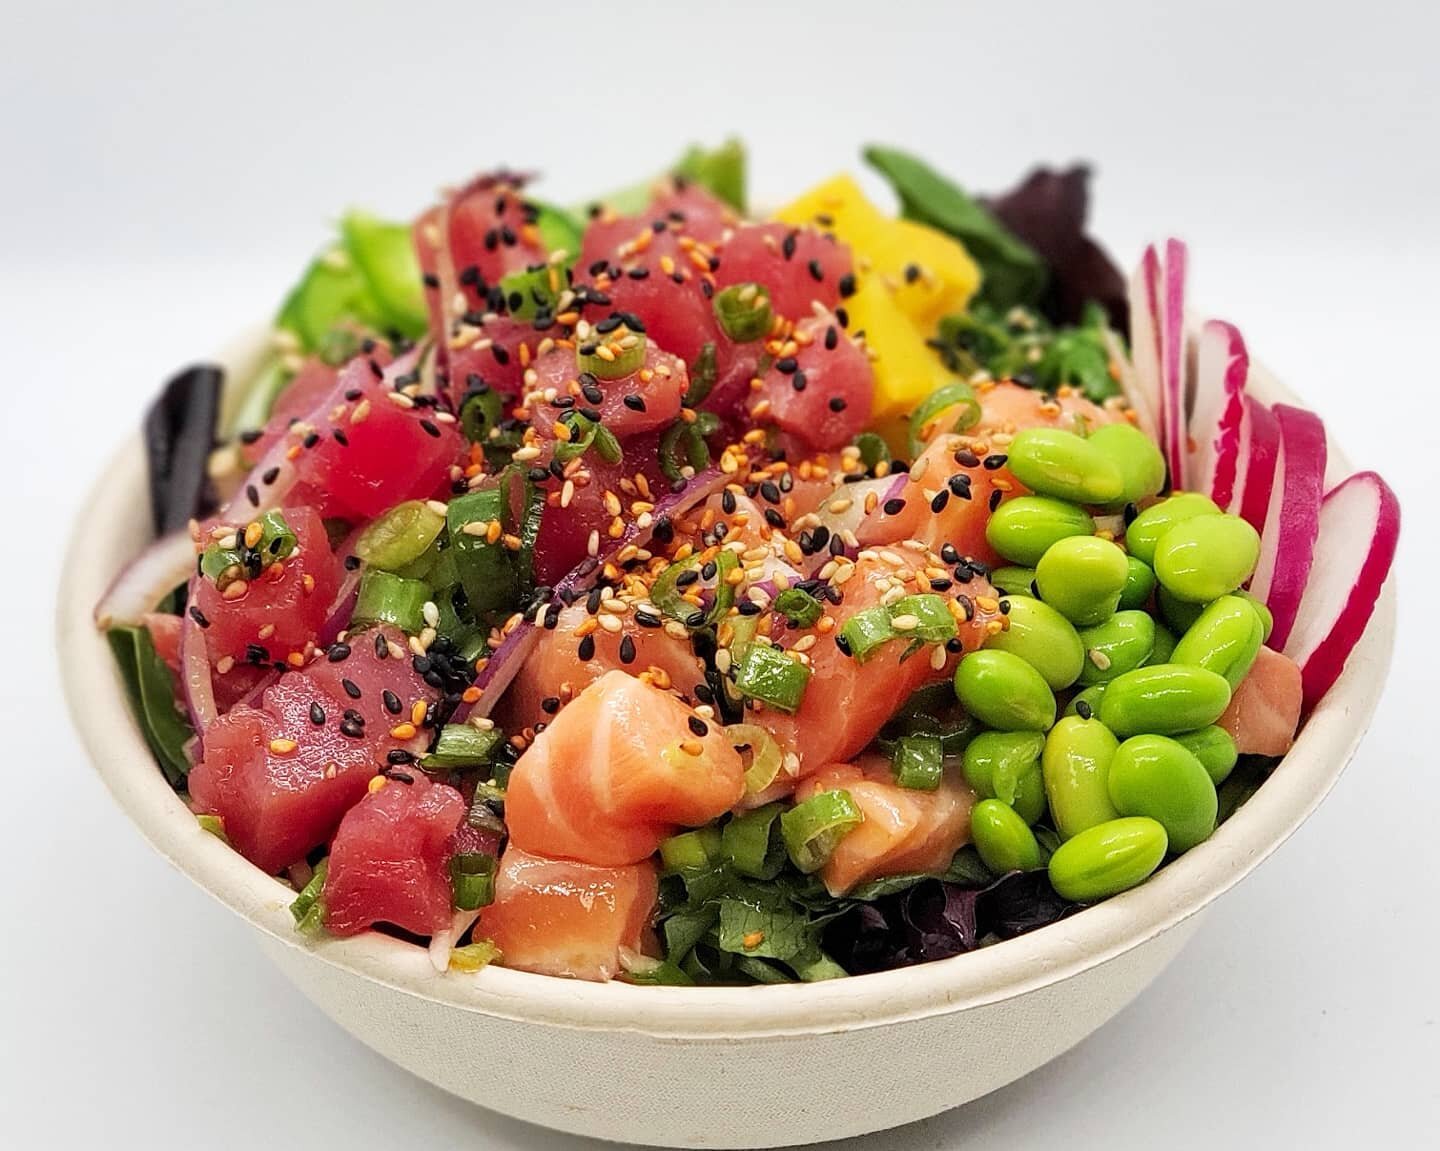 The health benefits of Poke is that it's rich in Omega-3 fatty acids, great source of protein, high in B vitamins, good source in potassium, contains antioxidants, and much more!

#fishologypokebar #fishology #pokebowl #poke #sushi #doordash #grubhub